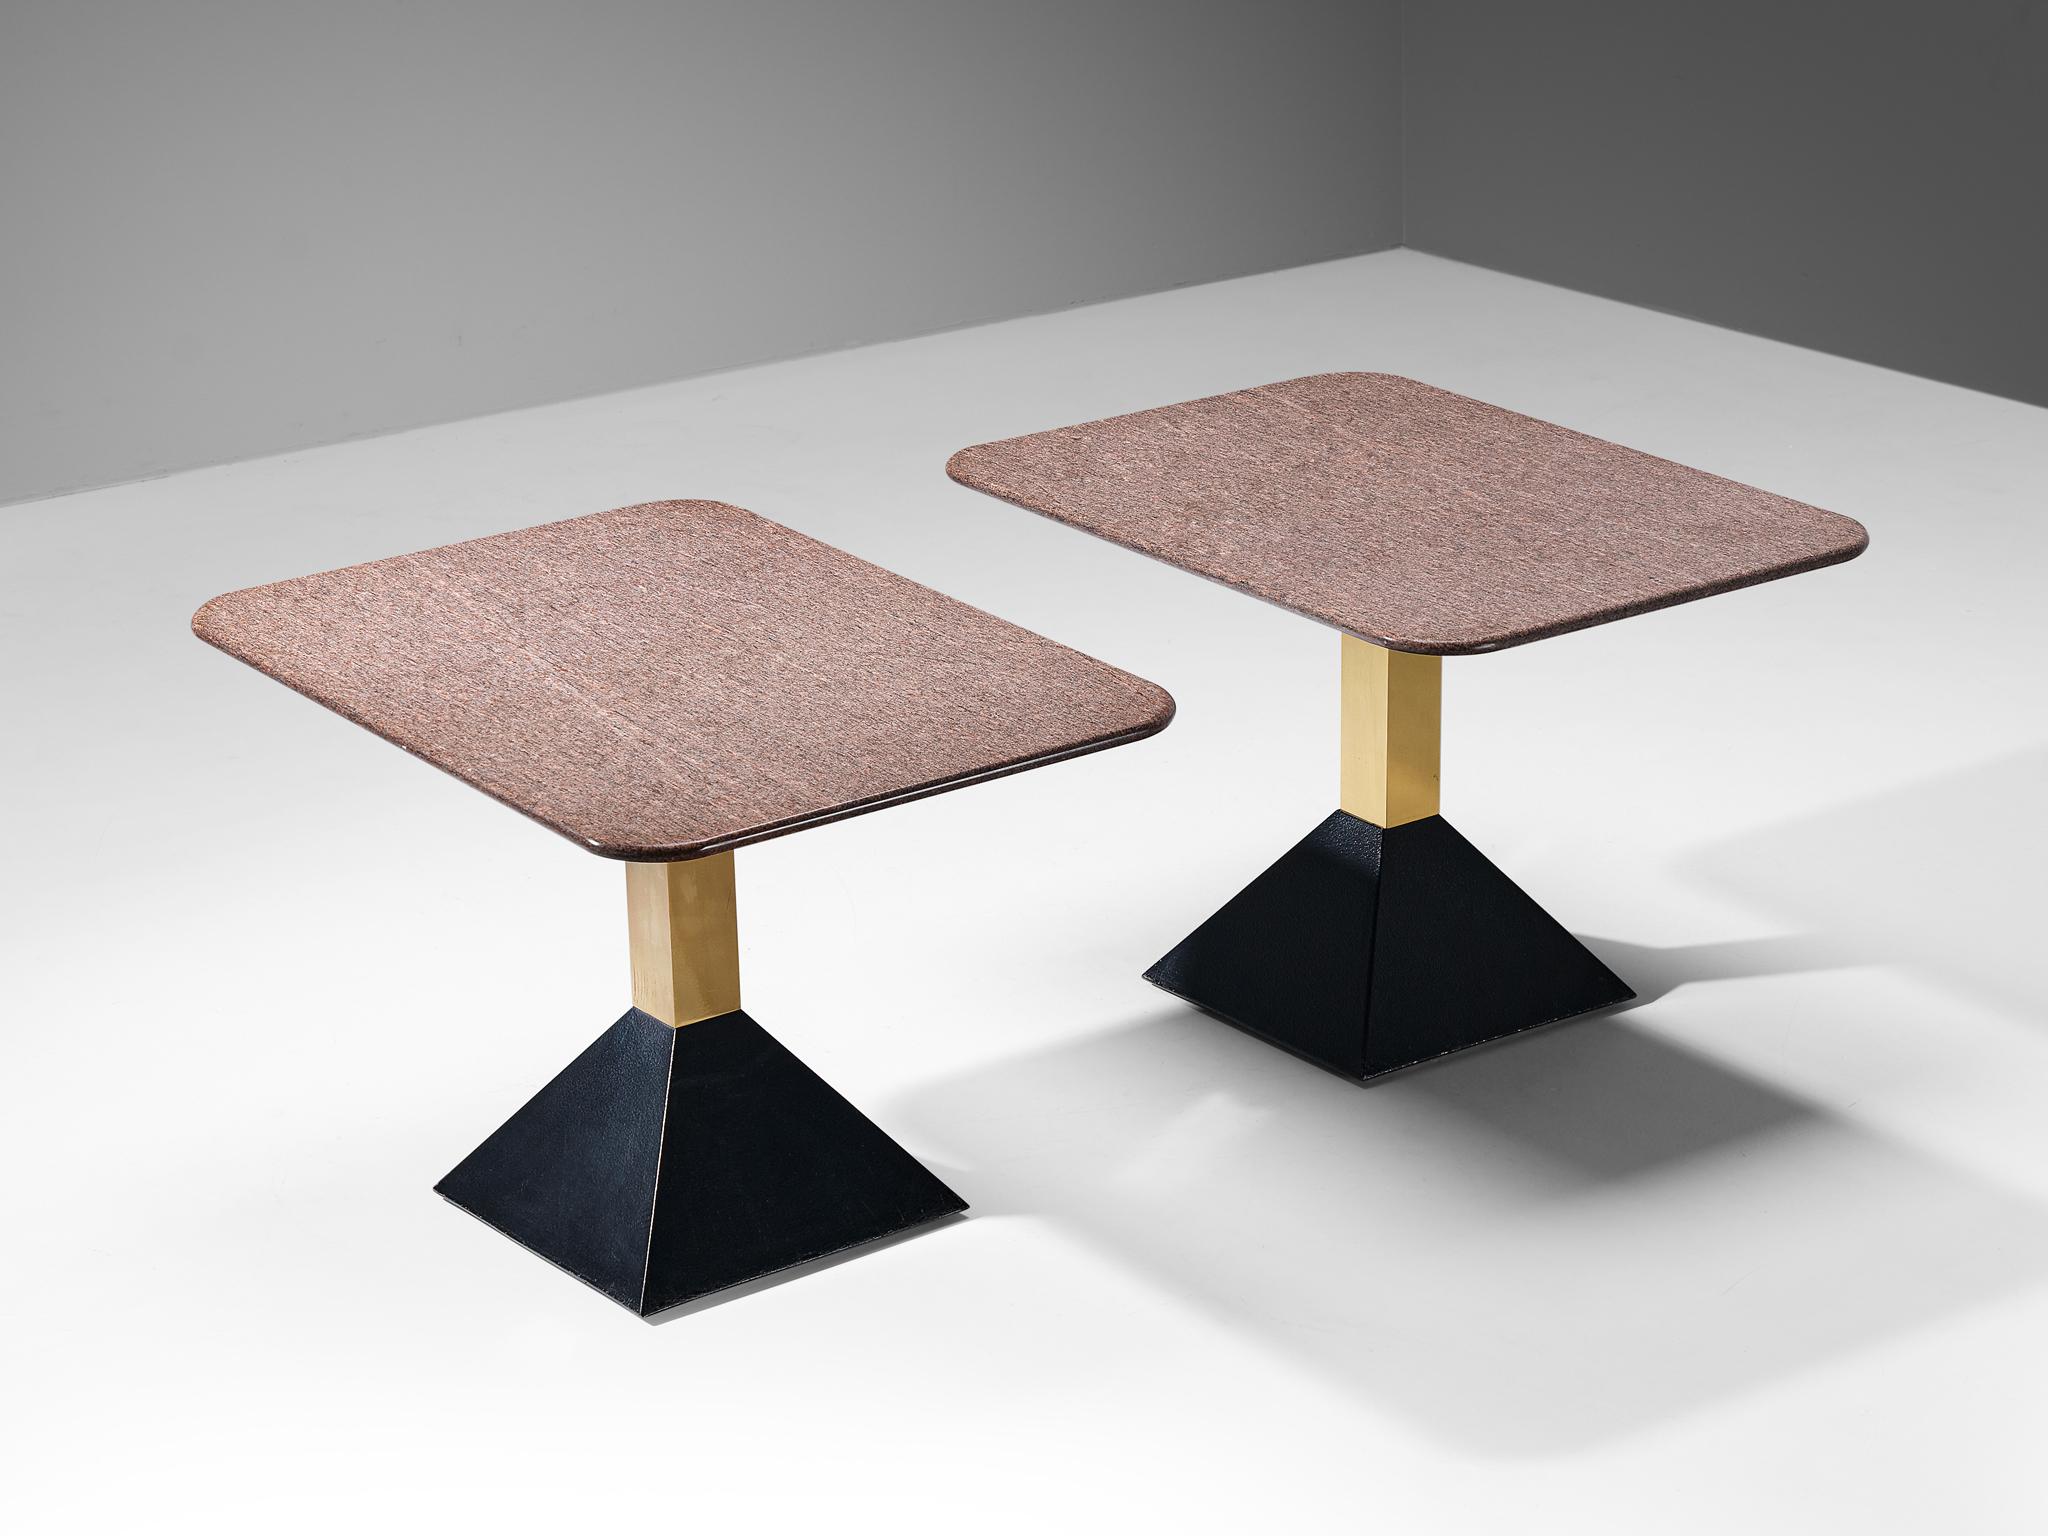 Coffee tables, granite, brass, black lacquered steel, Italy, 1980s

These side tables feature a brown granite tabletop in rectangular format. The granite shows a vivid surface. A brass pedestal ends in a black trapezoid base. The interplay between